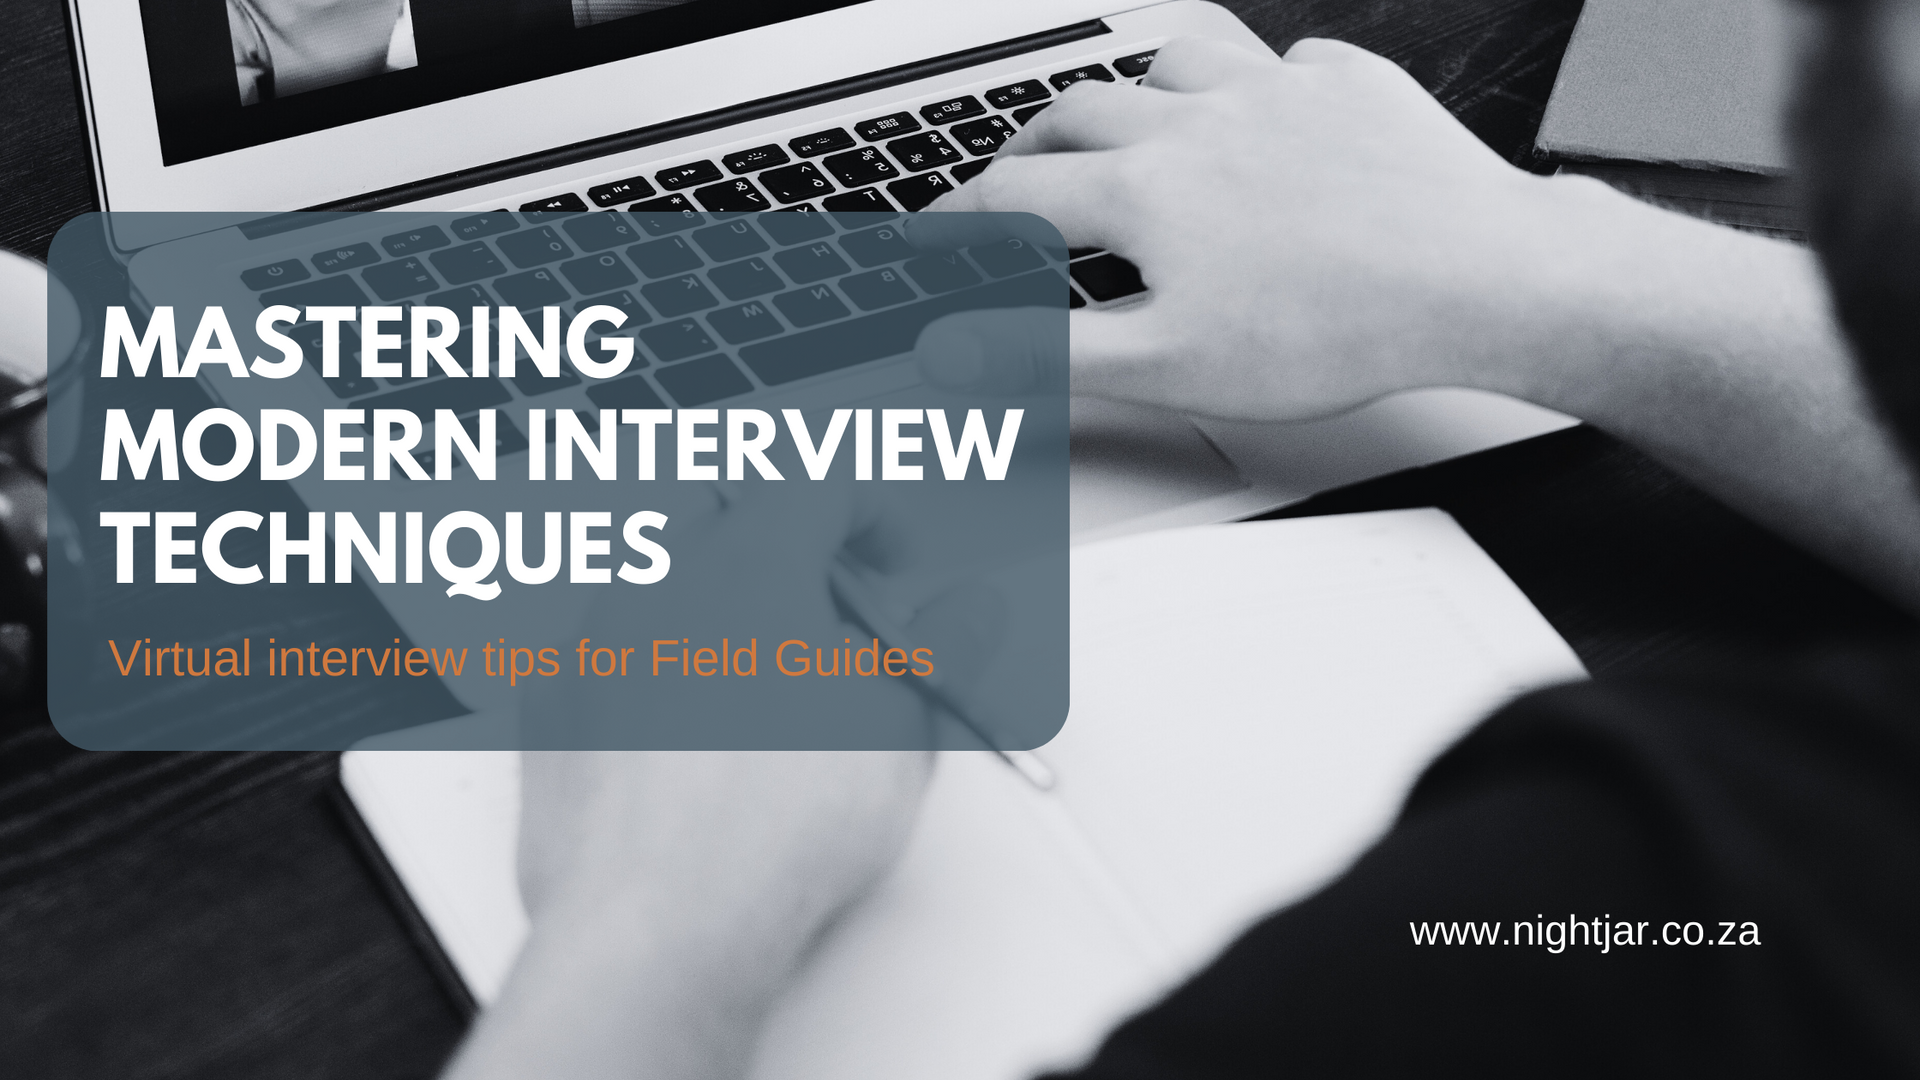 Mastering modern interview techniques